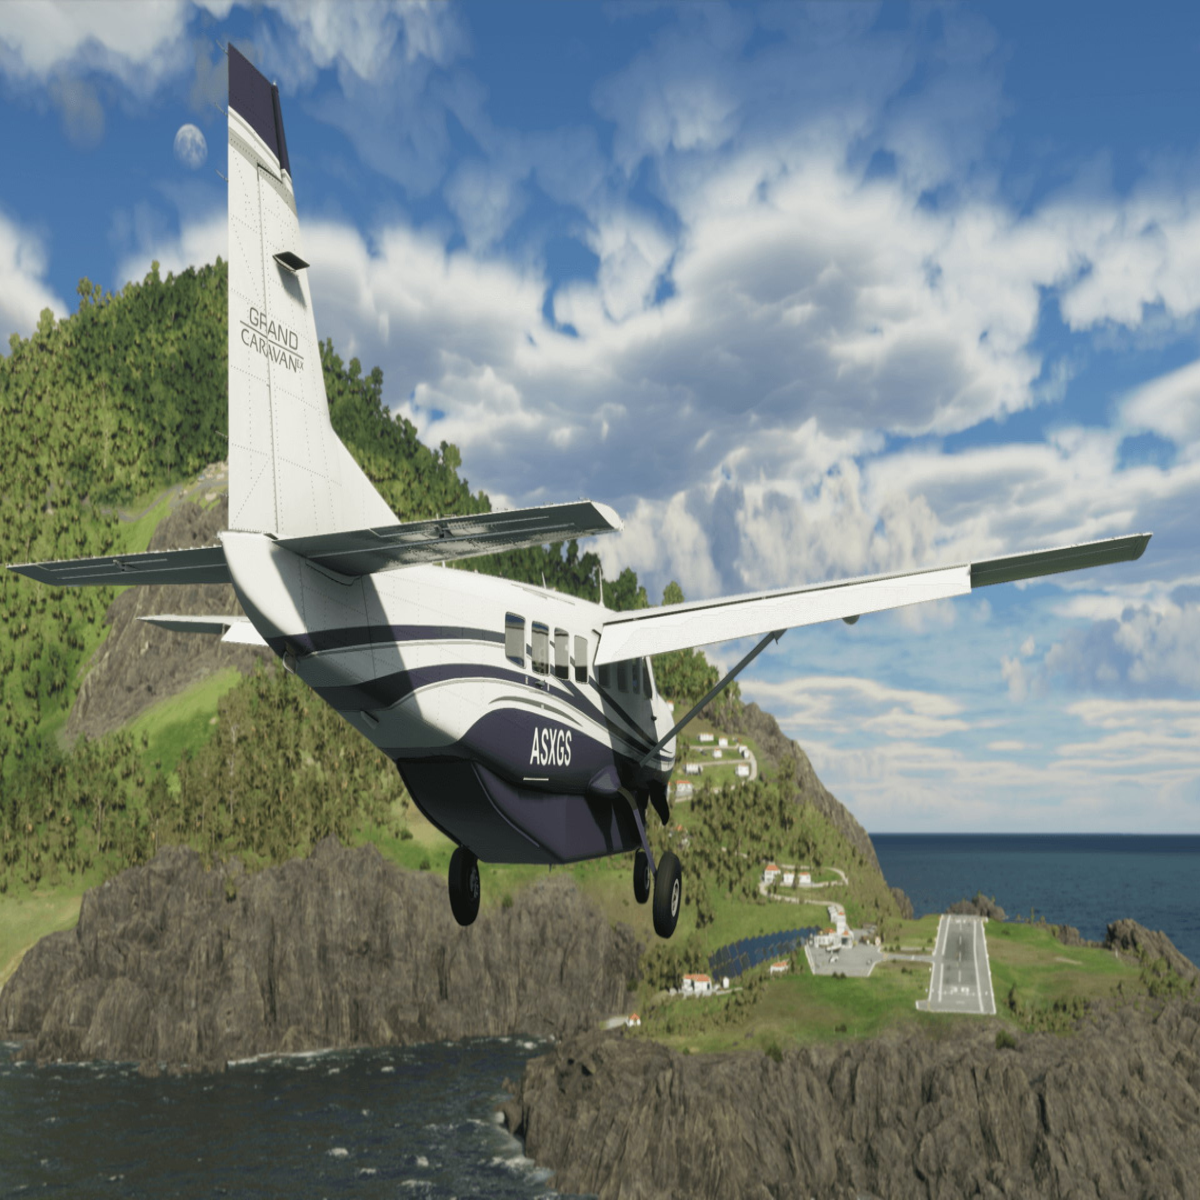 Tutorial: How to land a plane in Google Earth Flight Simulator